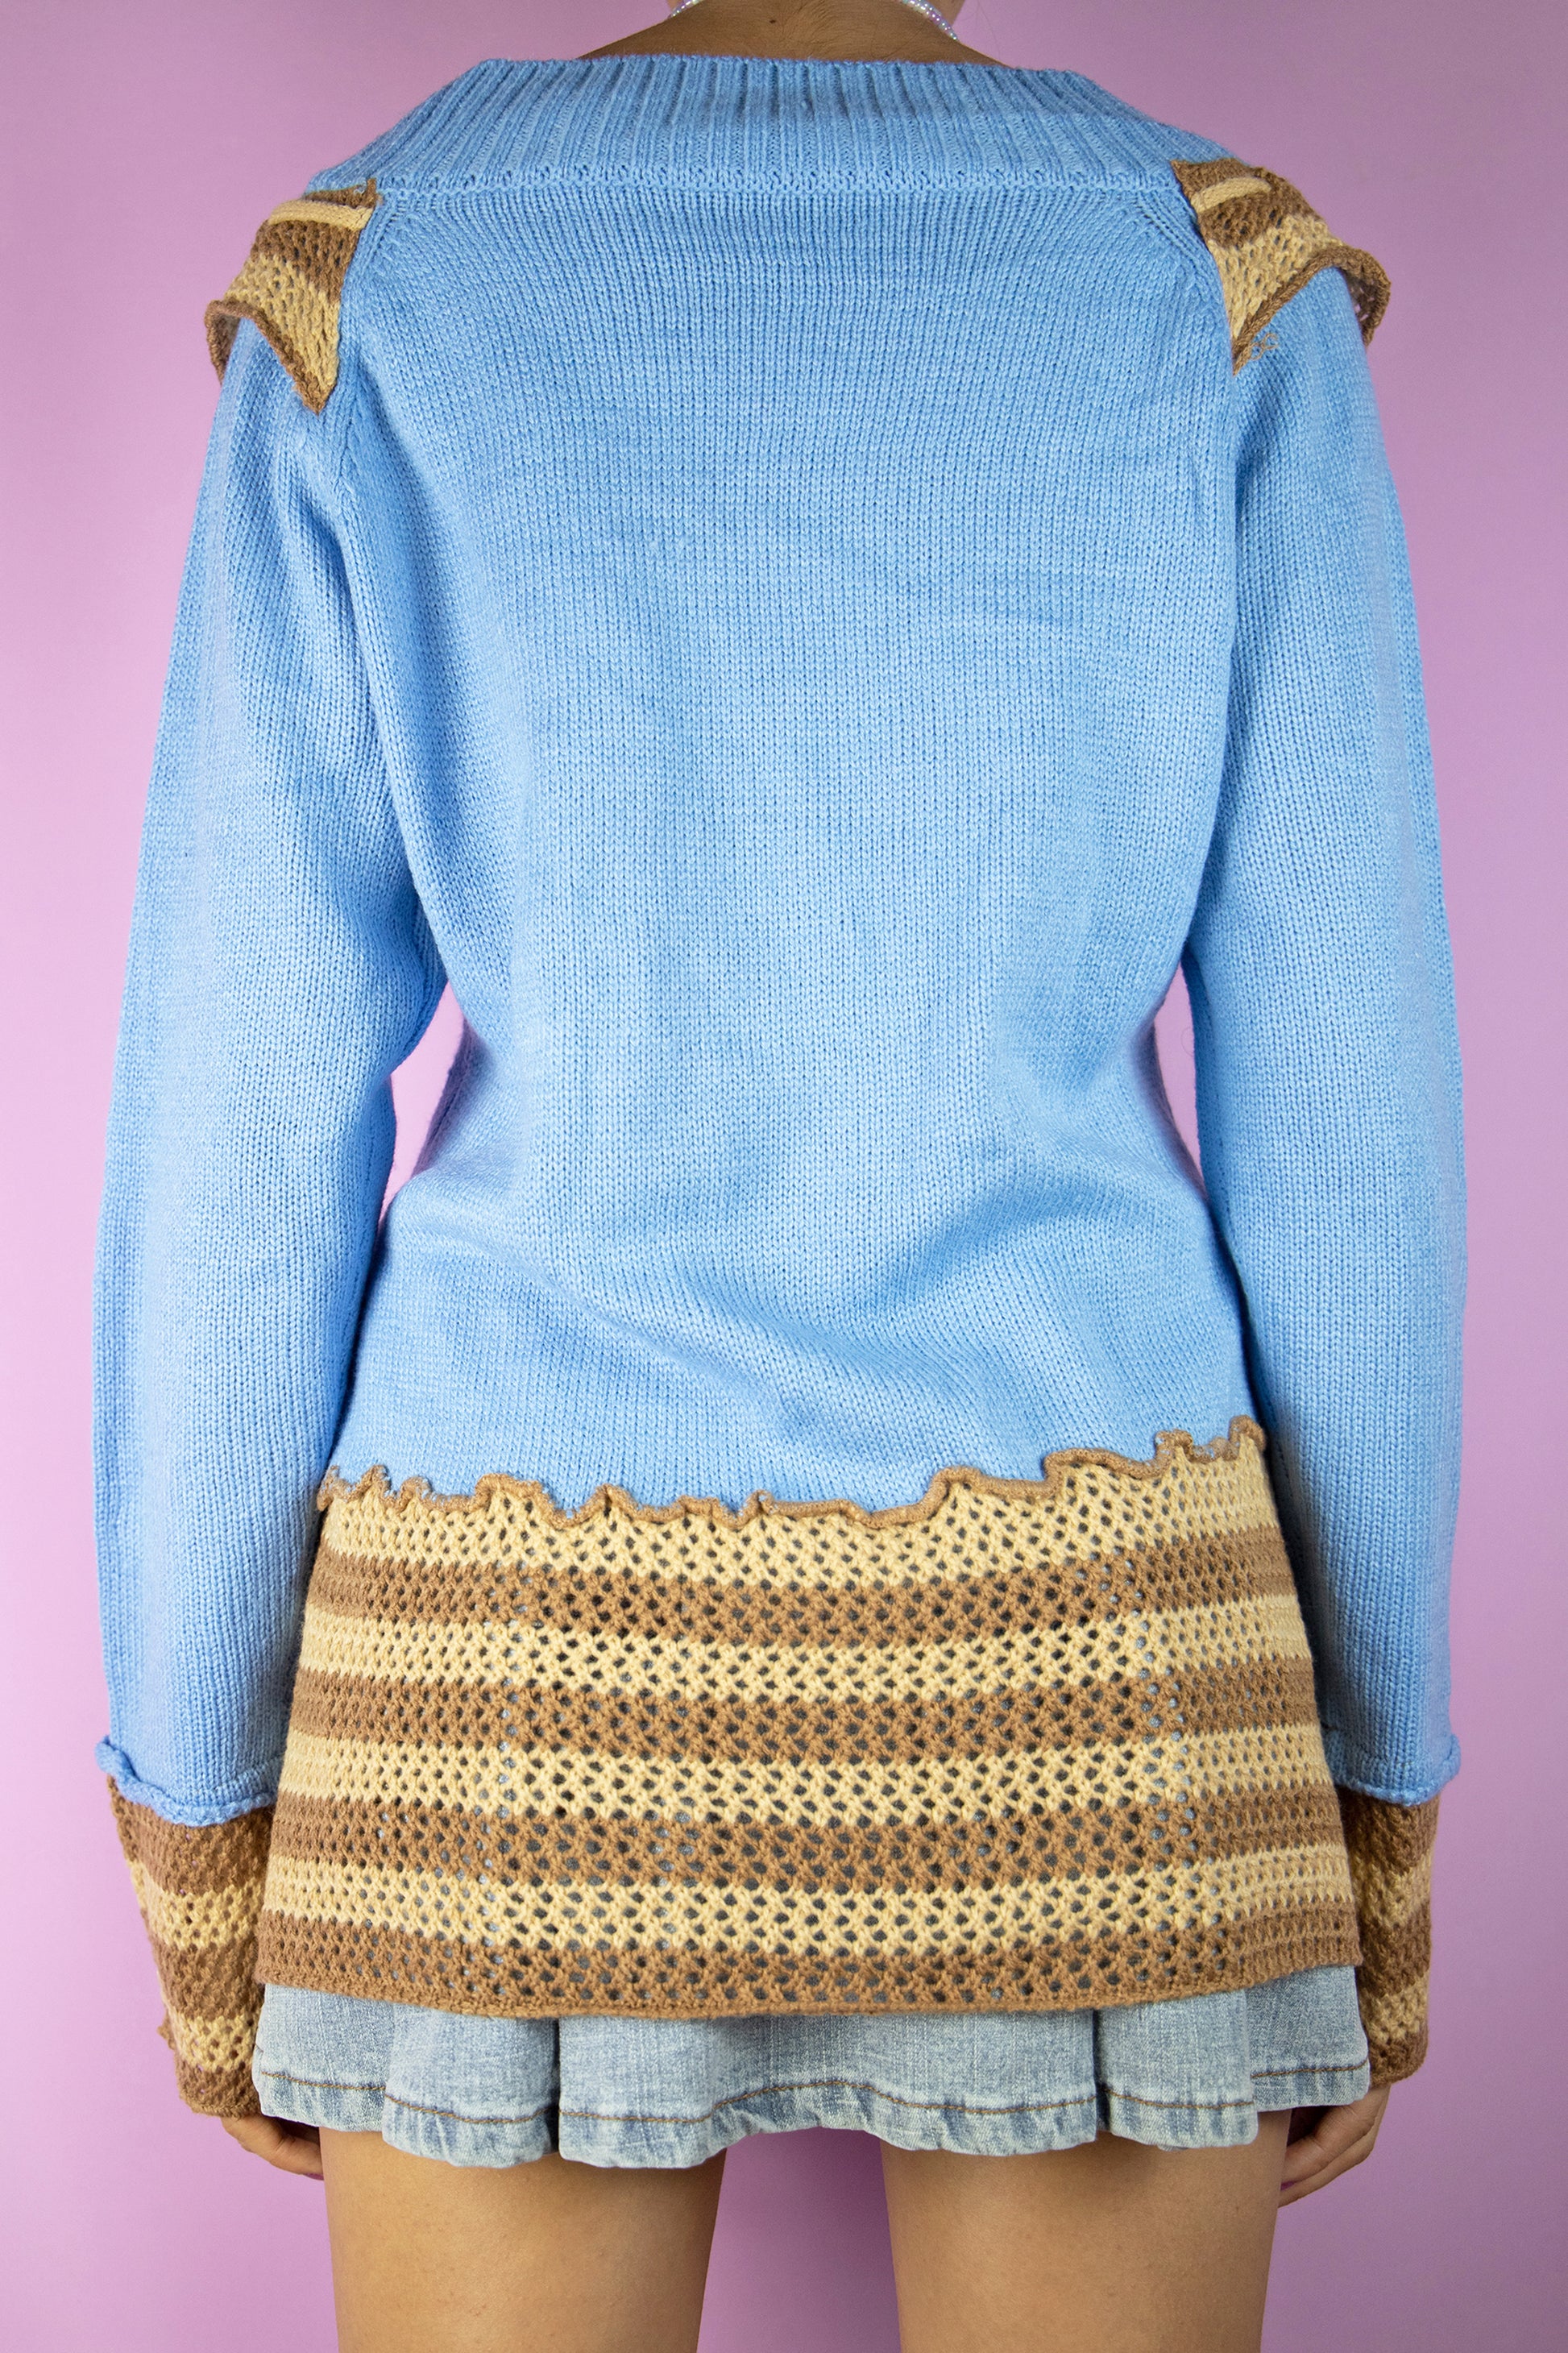 The Y2K Fairy Asymmetric Knit Sweater is a vintage 2000s boho grunge style blue pullover with brown and beige crochet details.